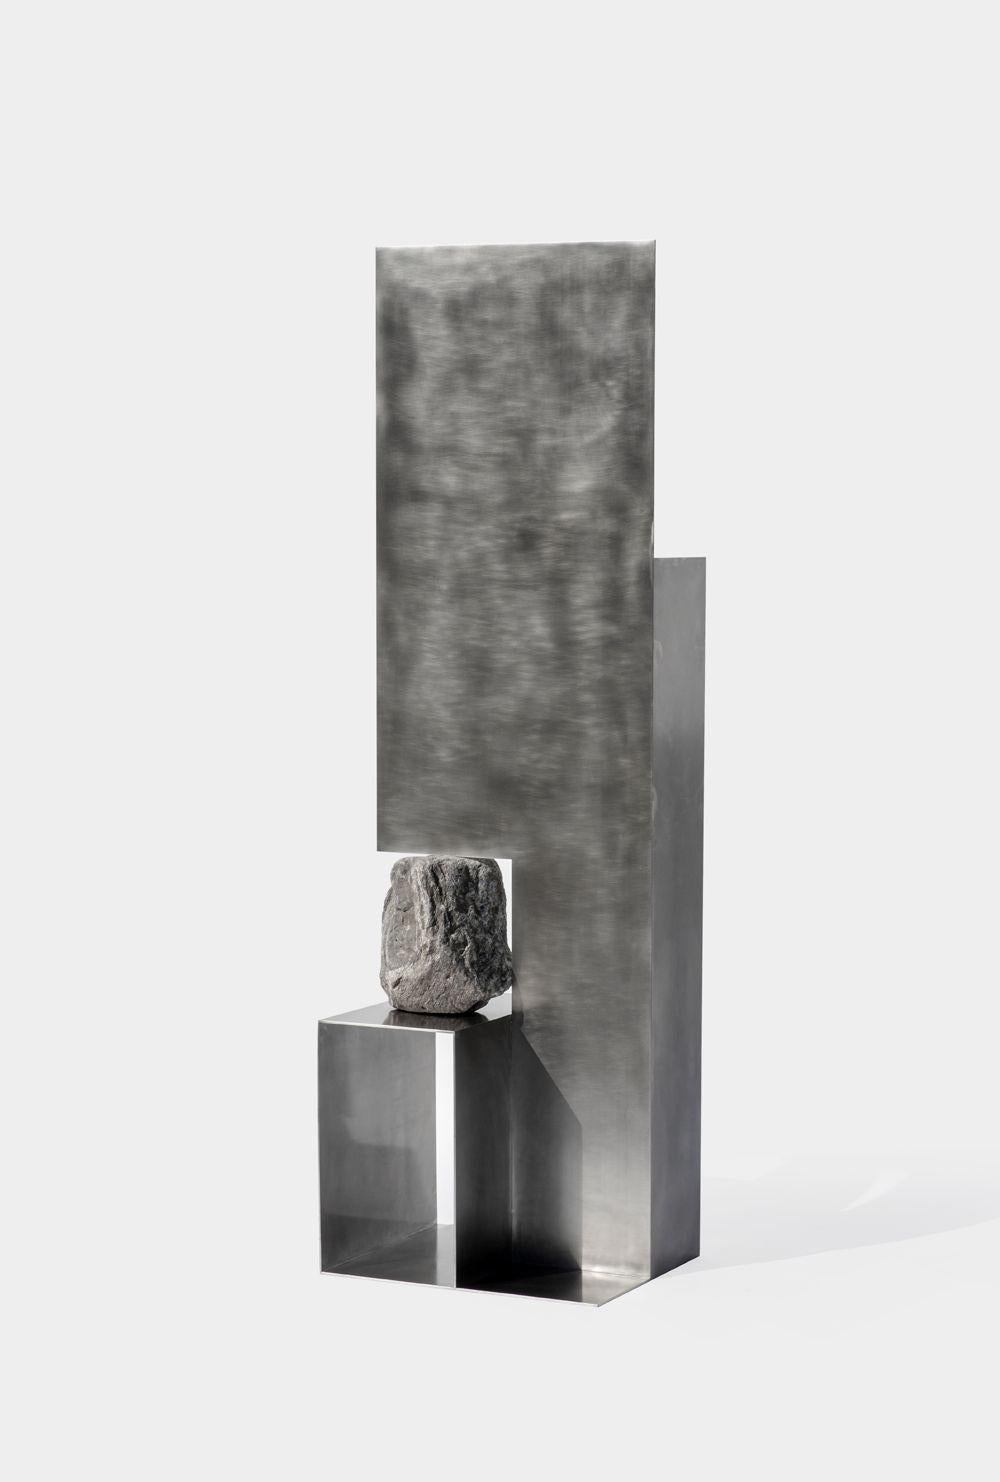 Proportions of Stone Objet 1 by Lee Sisan
Dimensions: W 60 x D 45 x H 200 cm
Materials: Stainless steel, natural stone

Each piece is made to order and uses natural stones, so please expect some variability in design.

